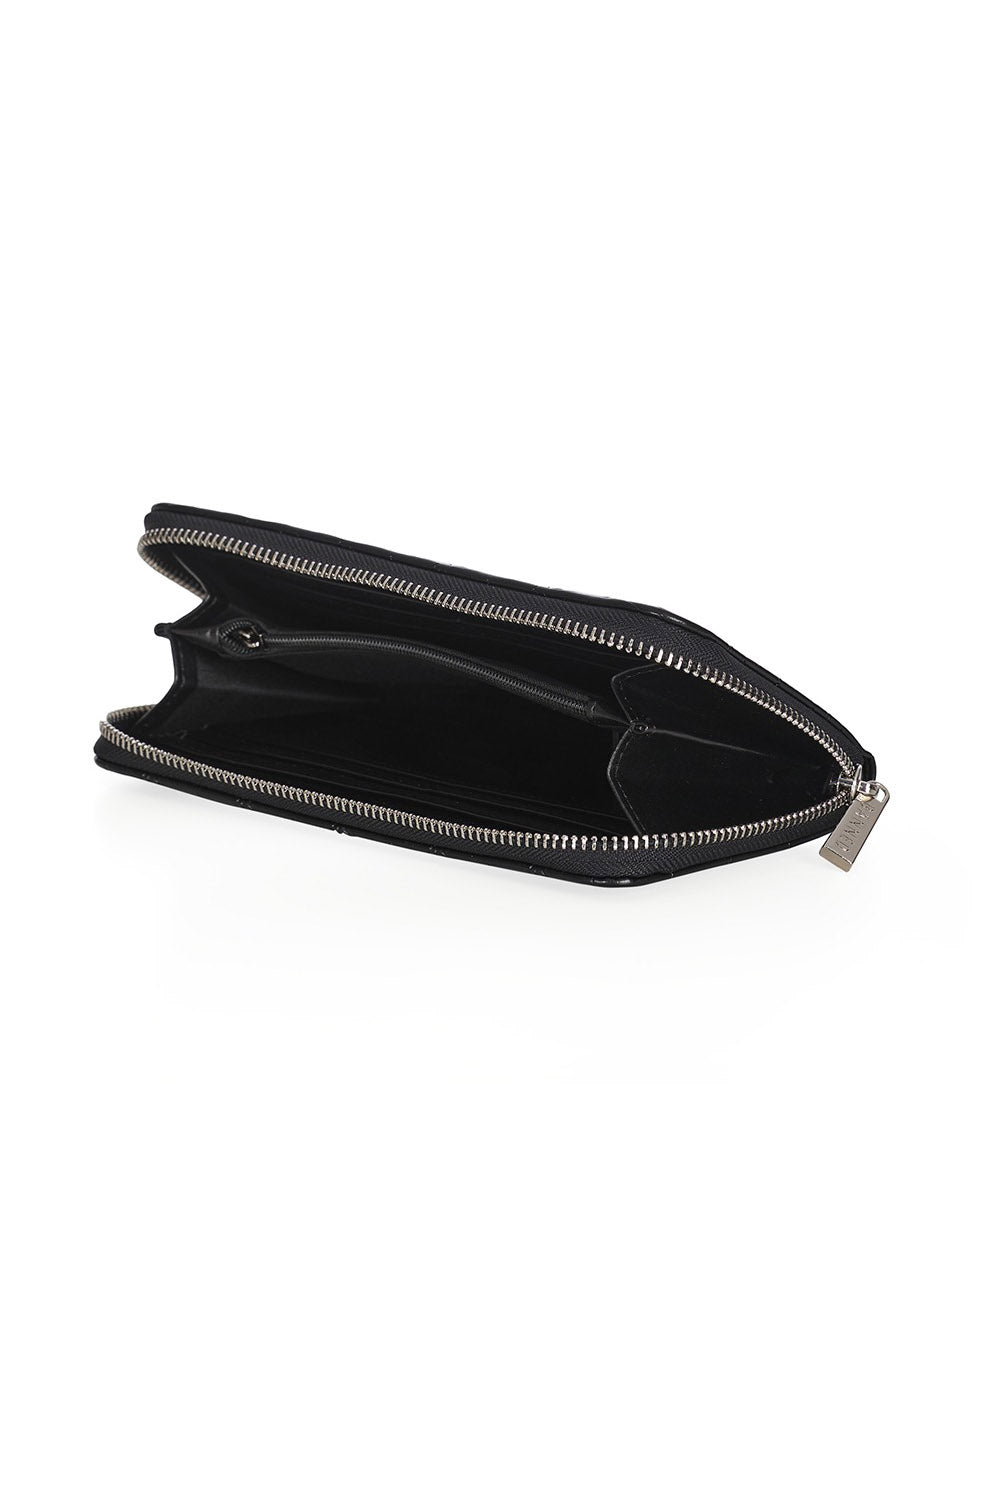 womens gothic black zippered long wallet